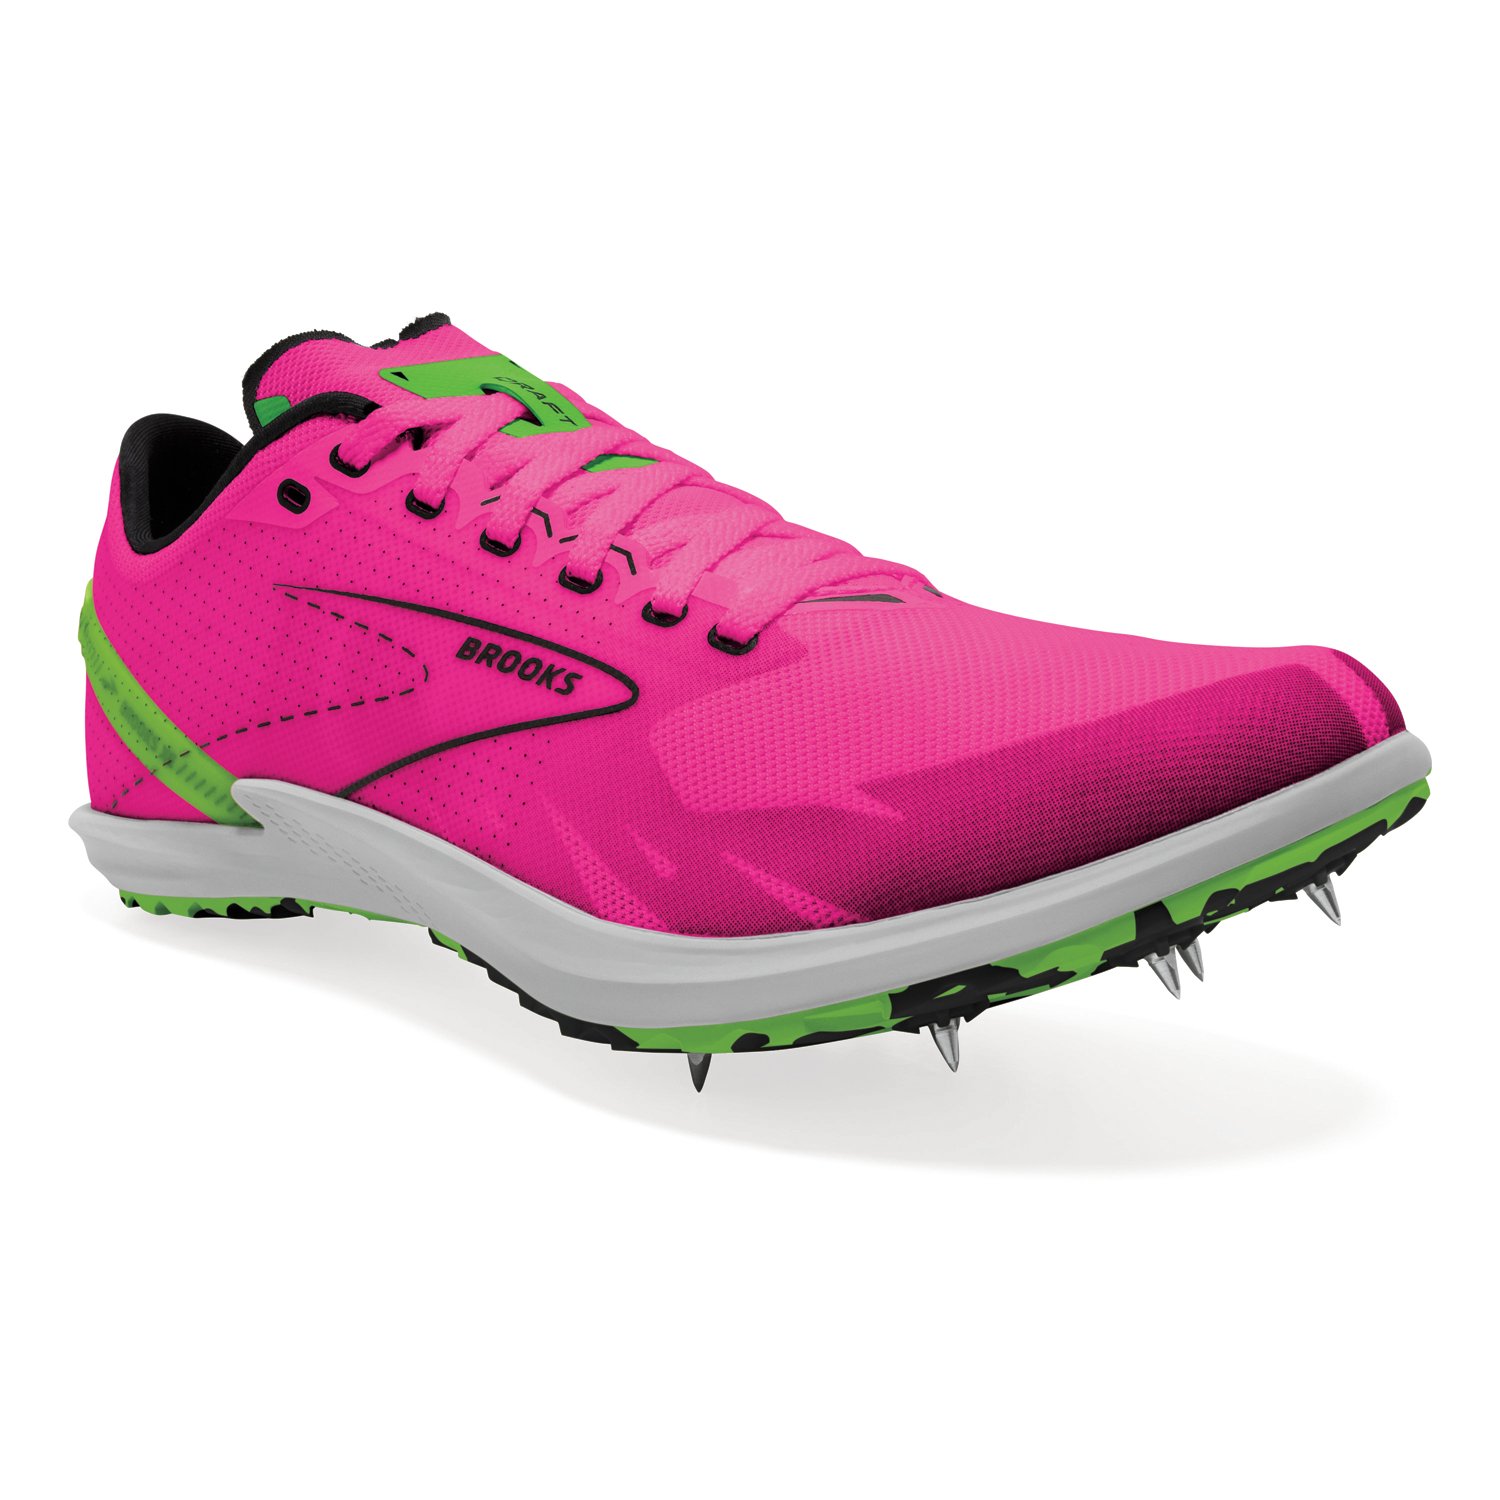 EiprShops, Track & Field Spikes – Track Cleats